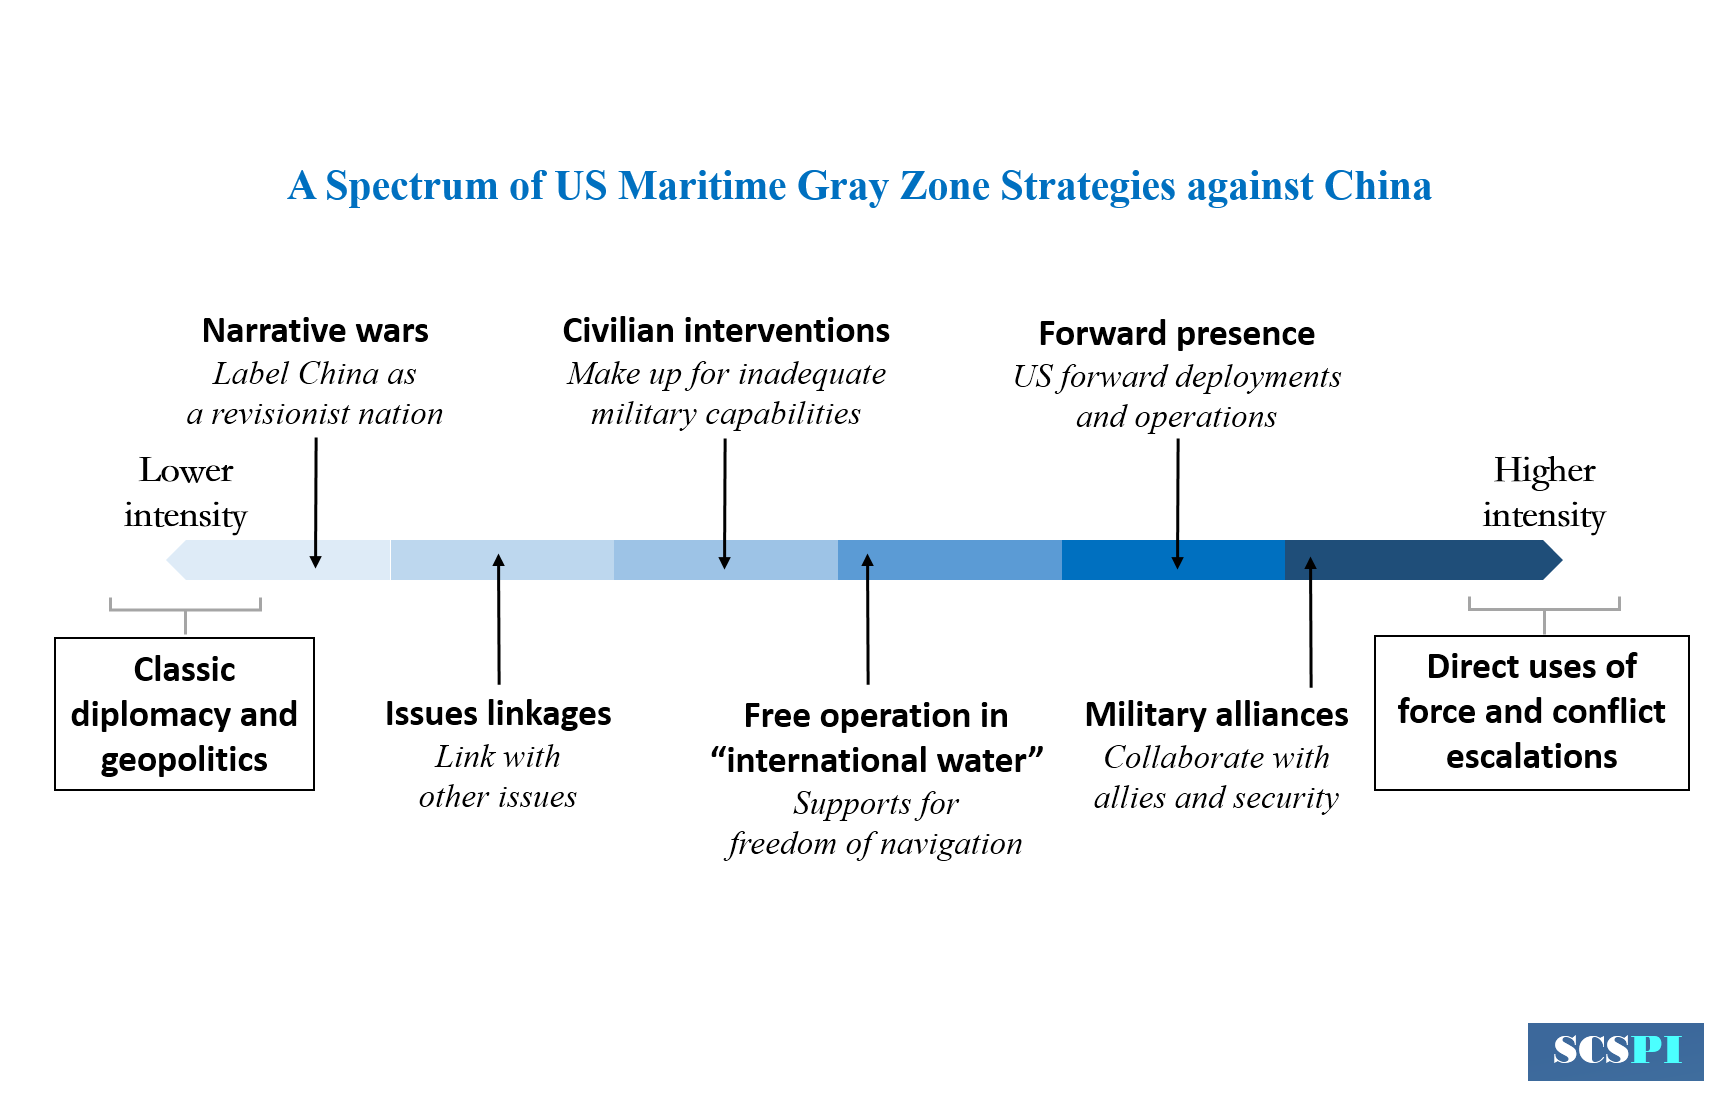 Detect and Understand: Modernizing Intelligence for the Gray Zone